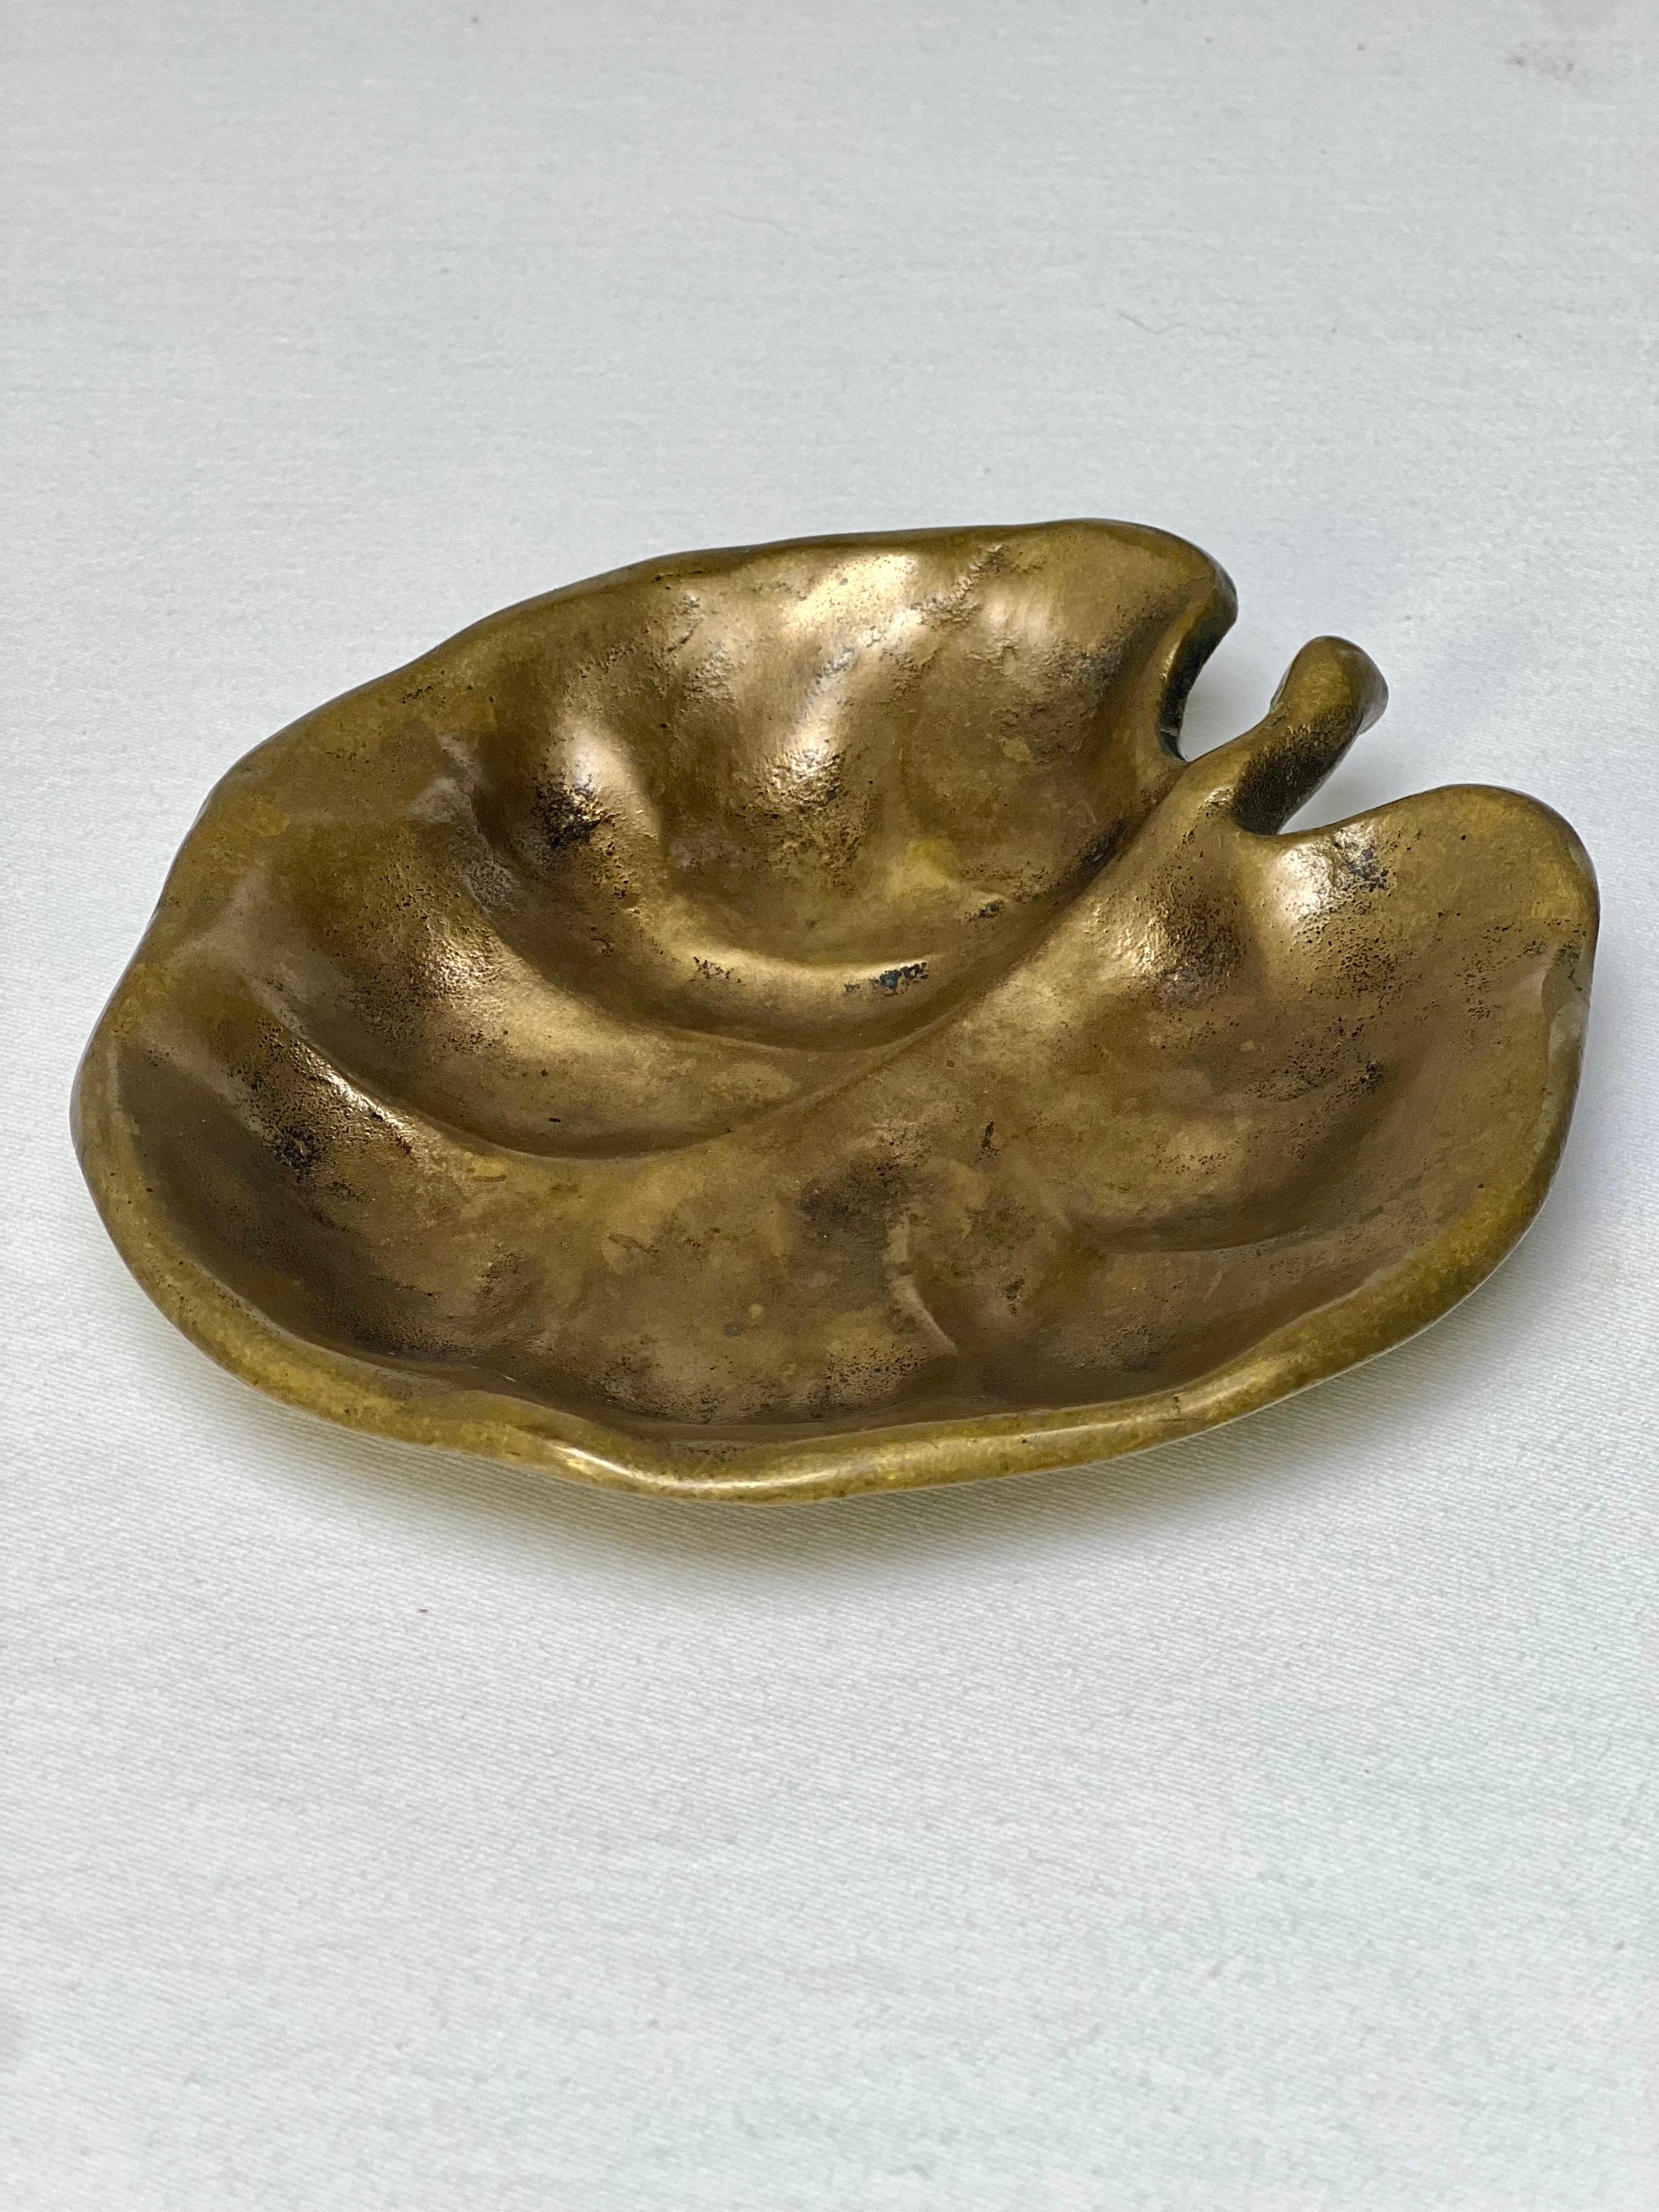 Solid bronze leaf form trinket or valet dish, signed Graham Bronze.

A lovely work with smooth organic shaped edge and gently curved details. Beautiful alone or handy for rings, keys, or any important small items. Perfect for a vanity, desk, entry